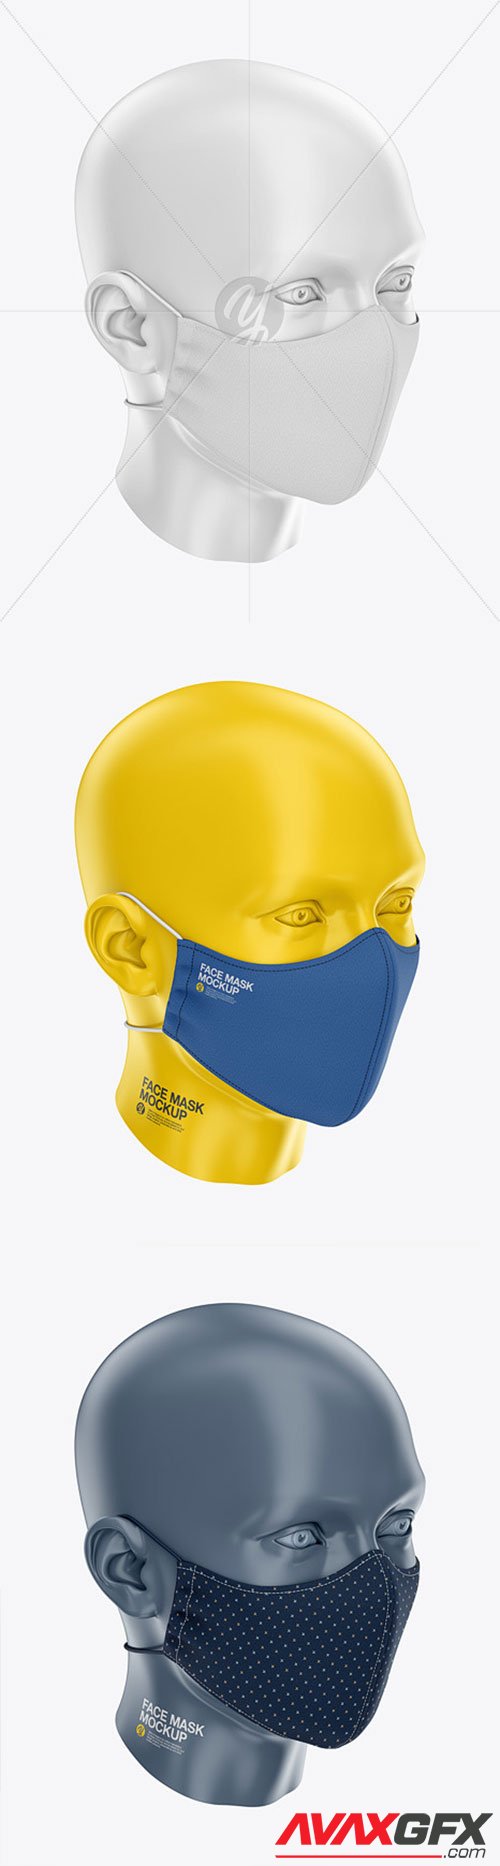 Face Mask with Elastic Cord and Stopper - Front Half-Side View High Angle 62512